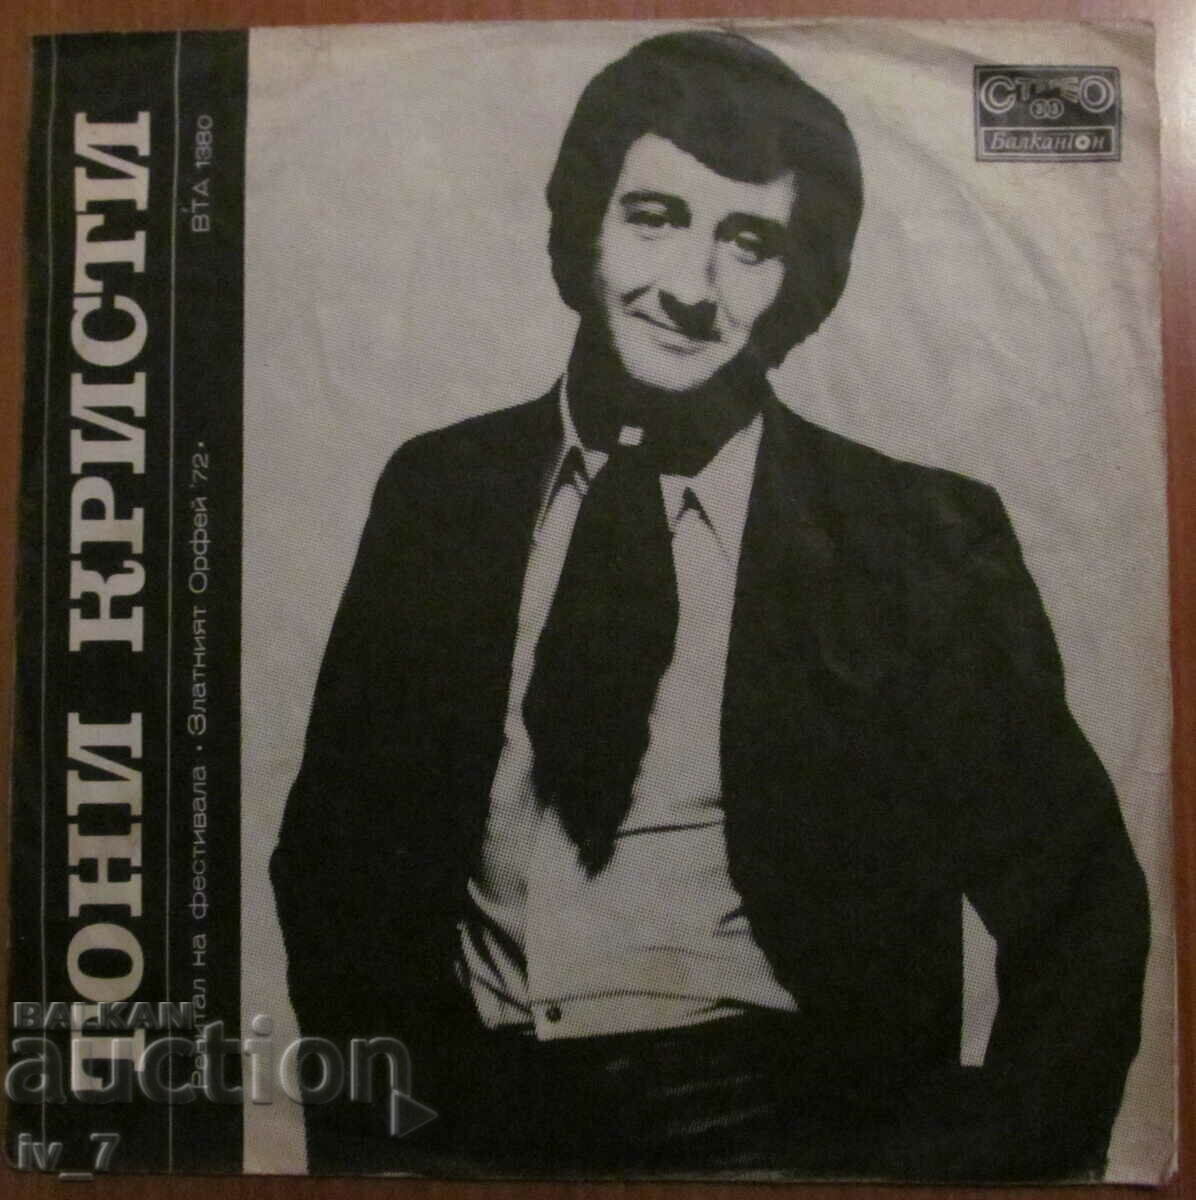 RECORD - TONY CHRISTIE, large format